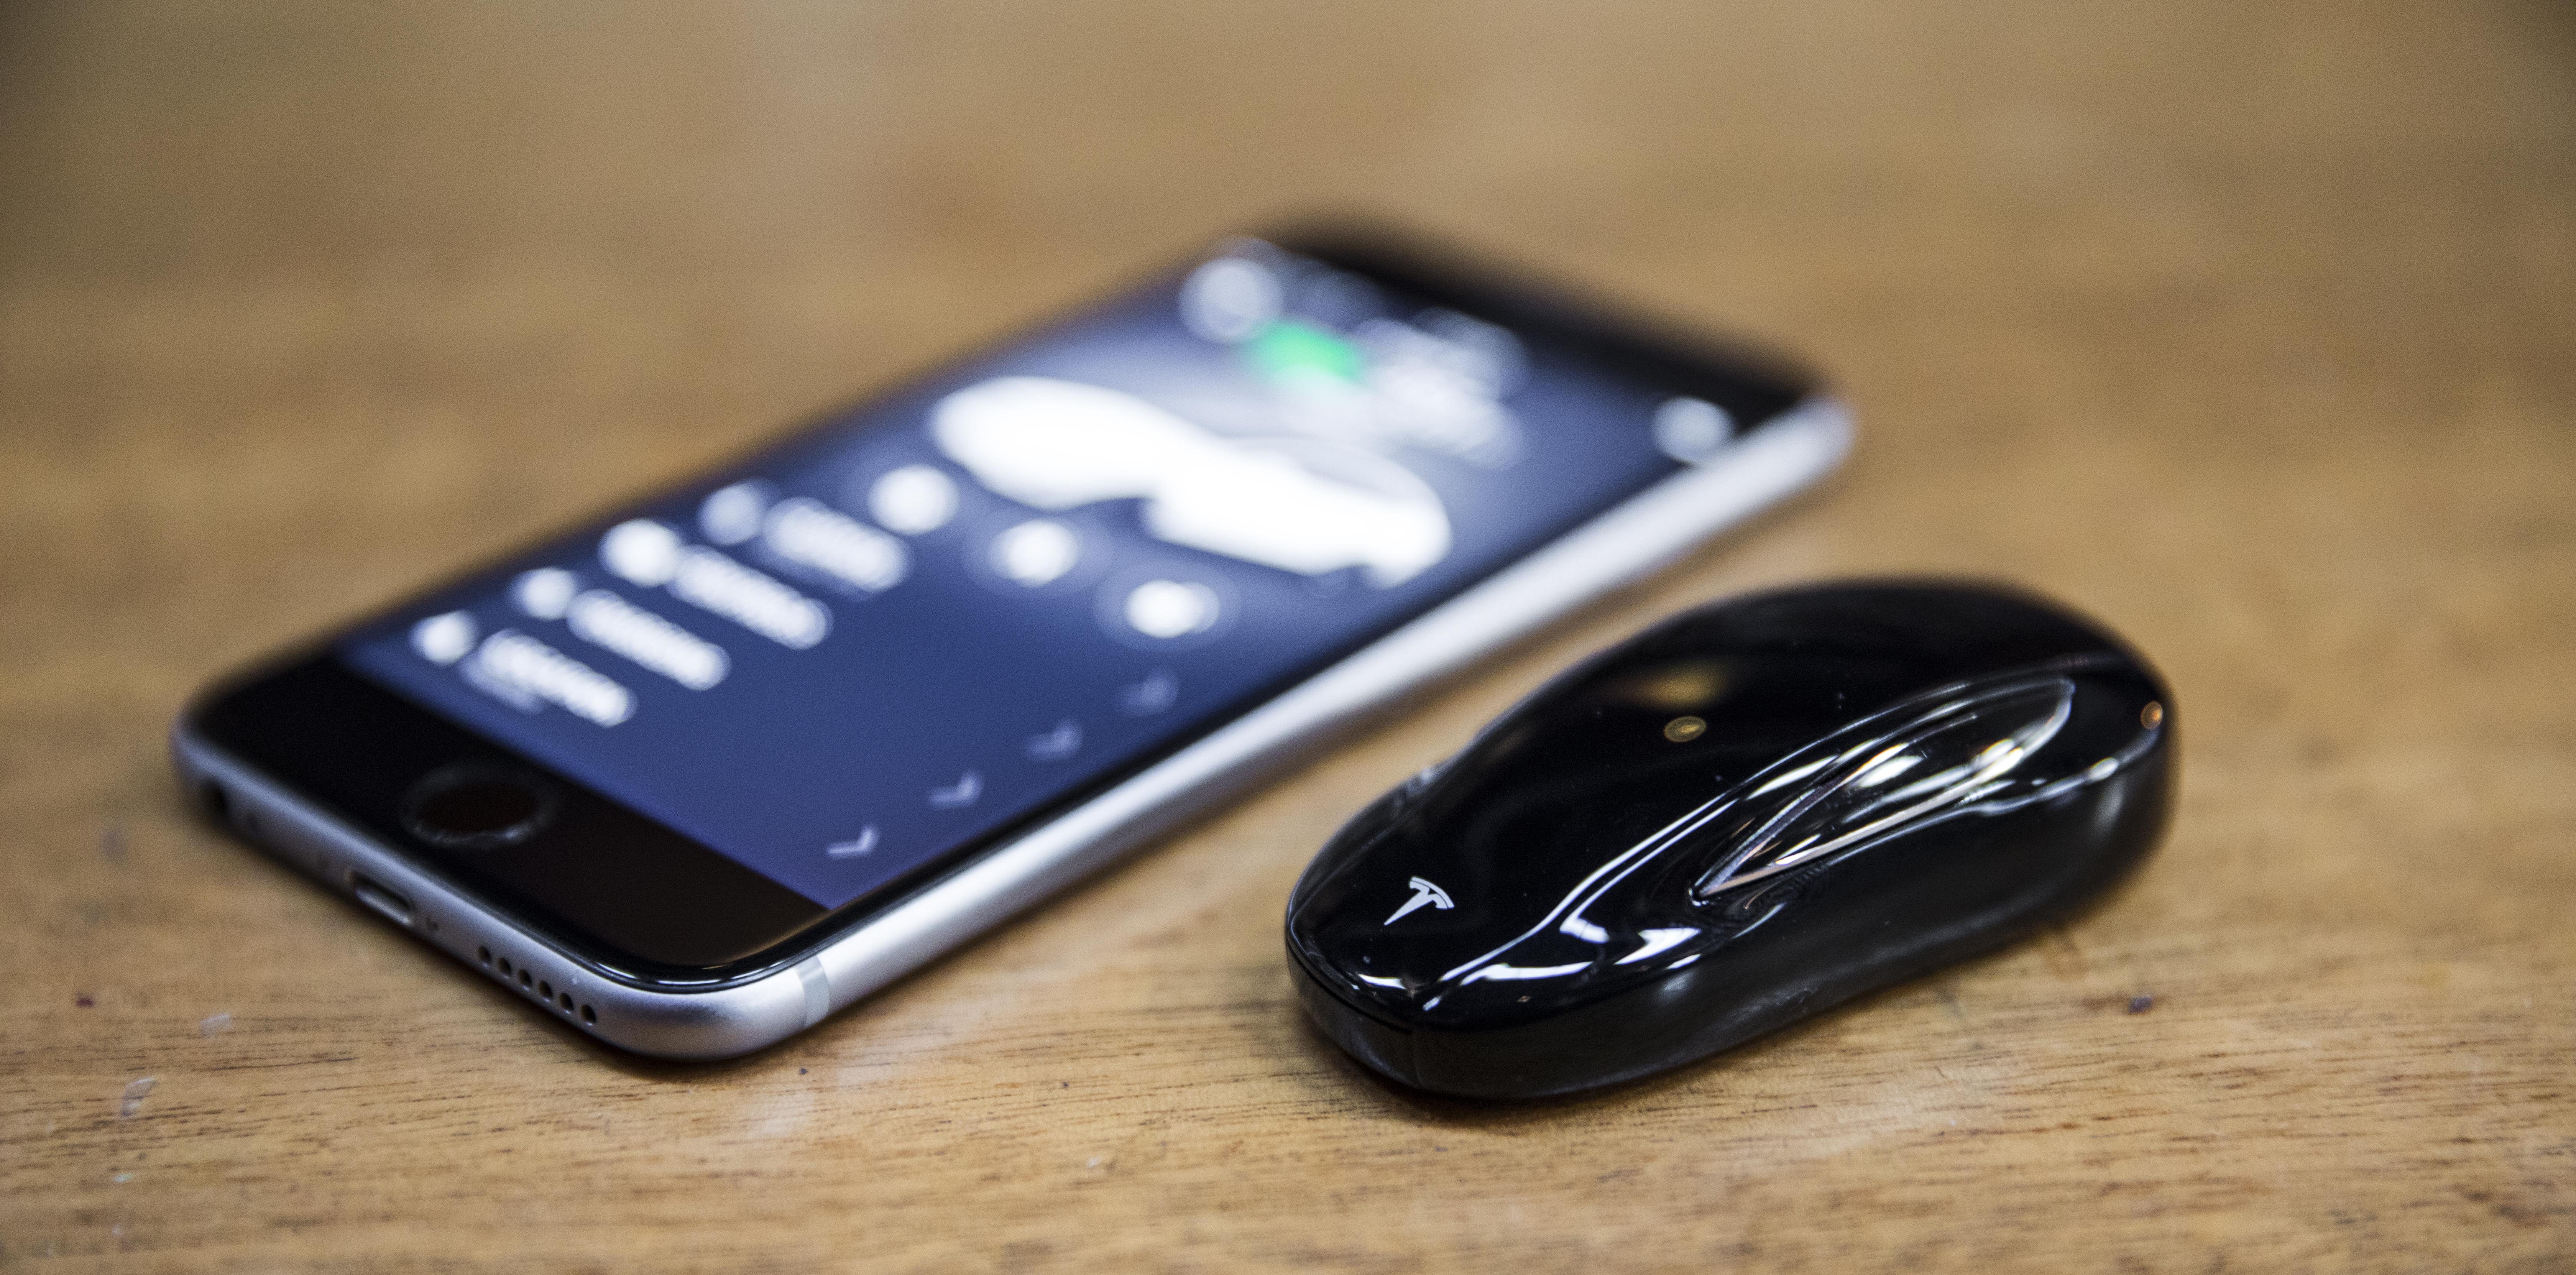 Tesla is working on new key fob with auto unlocking 'immune to